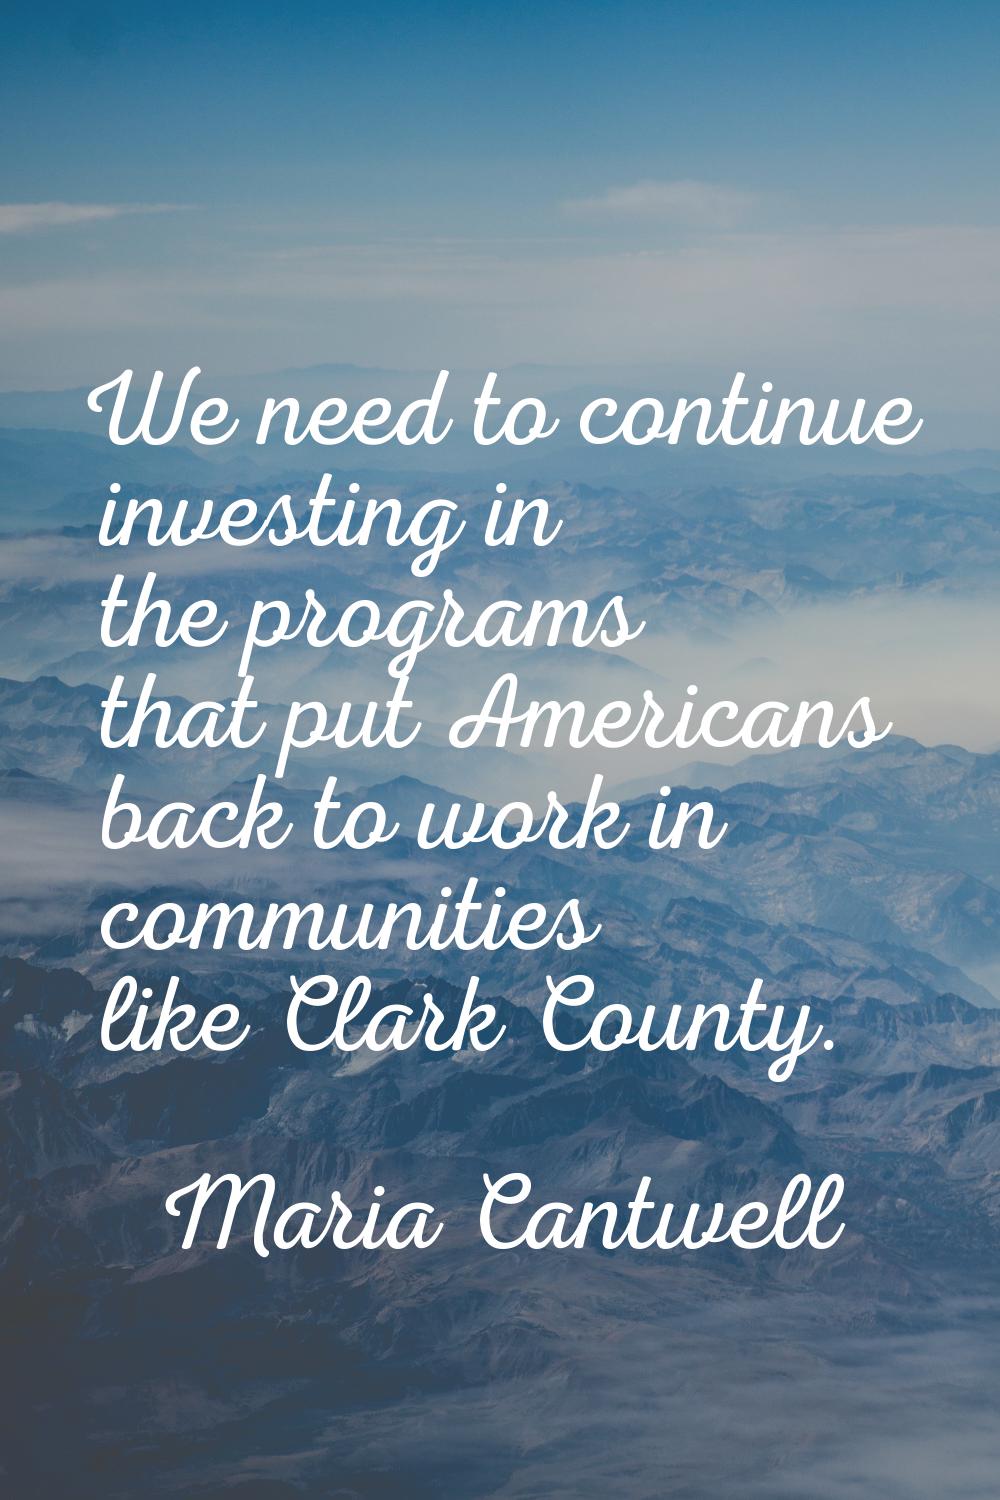 We need to continue investing in the programs that put Americans back to work in communities like C